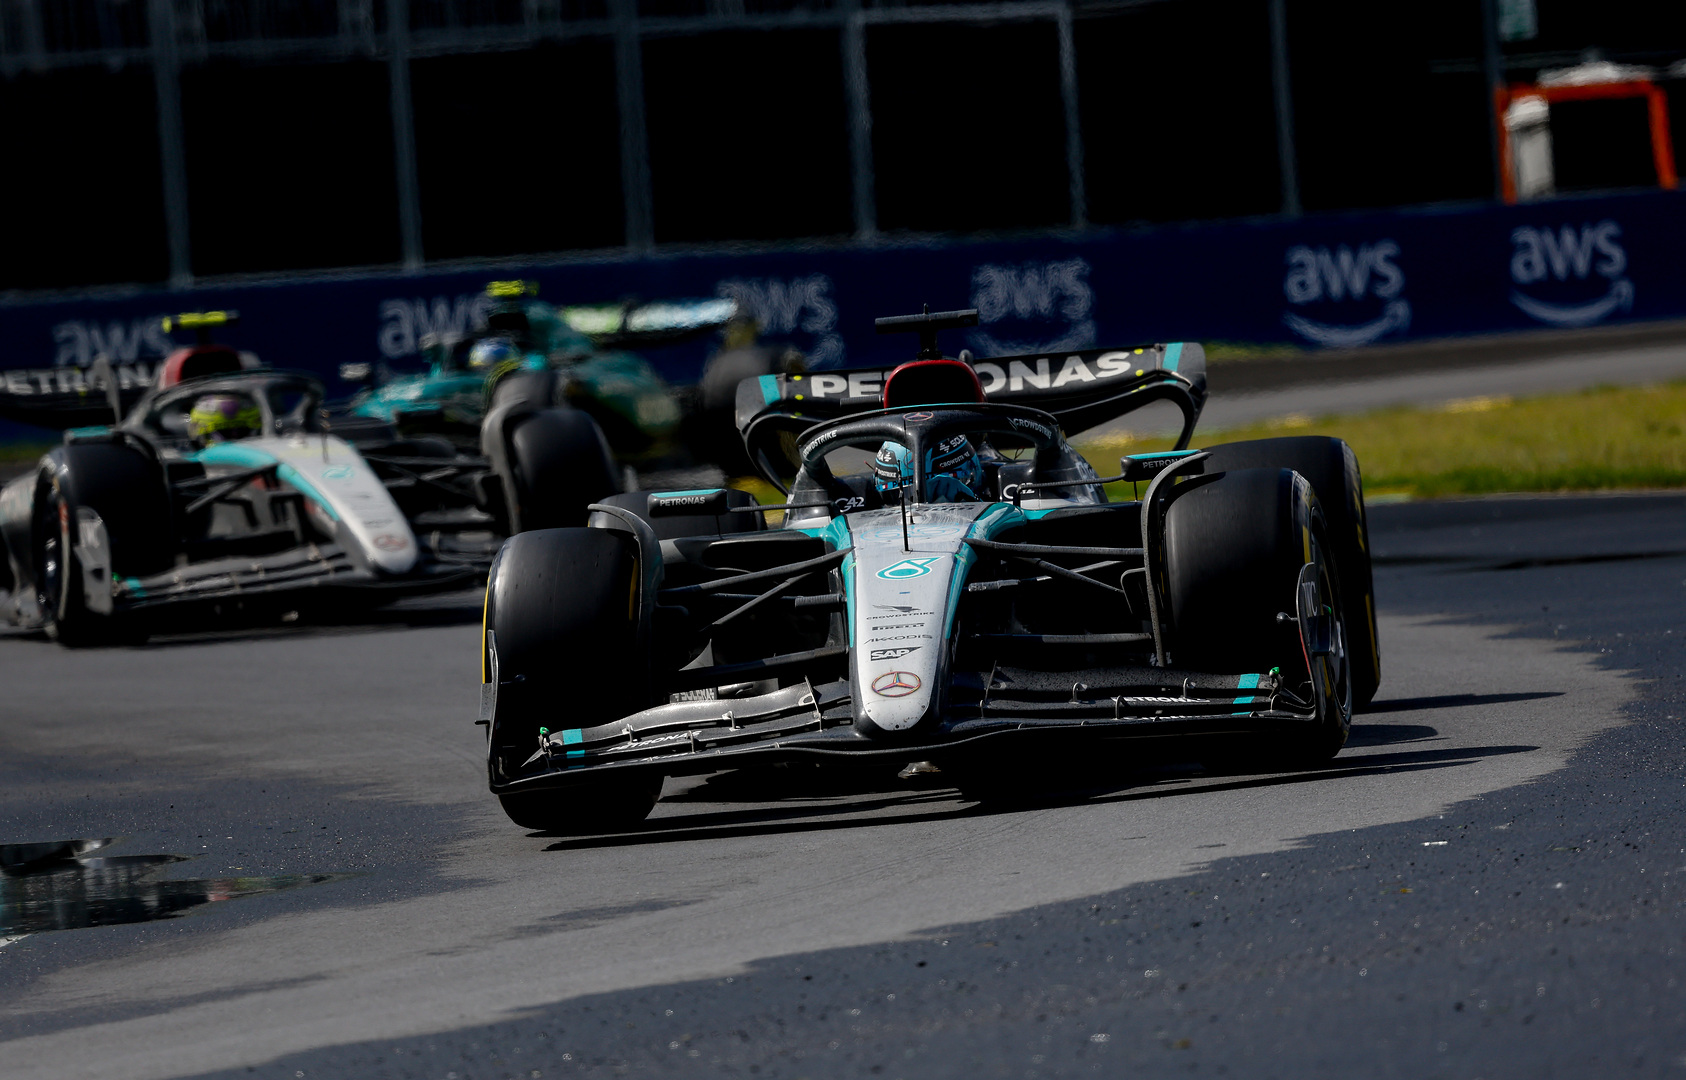 Canadian Grand Prix, Sunday - George Russell leads Lewis Hamilton